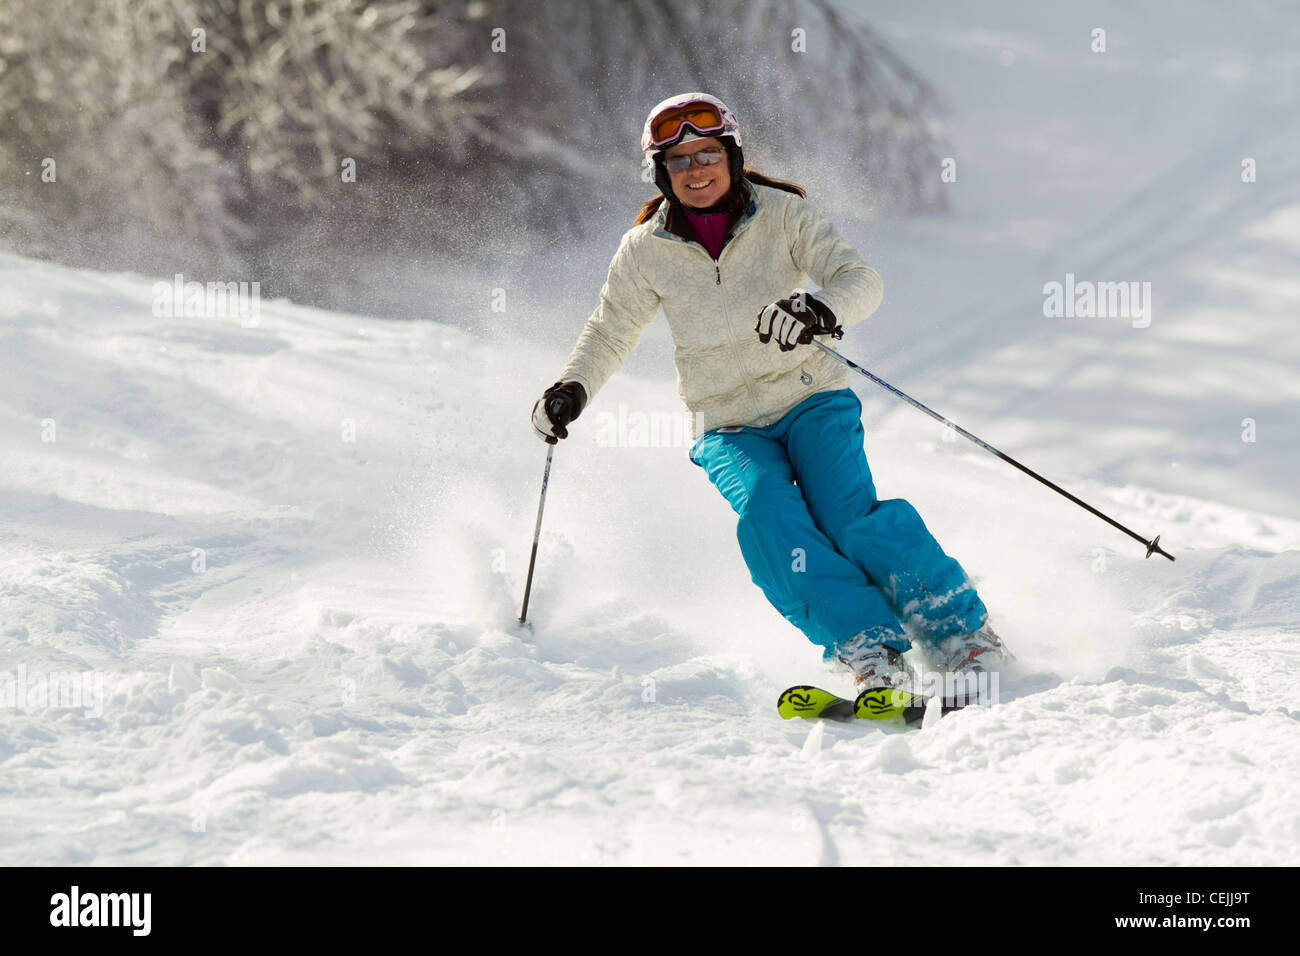 A skier comes down a frosty slope at Bretton Woods Ski area in New Hampshire's White Mountains. Stock Photo